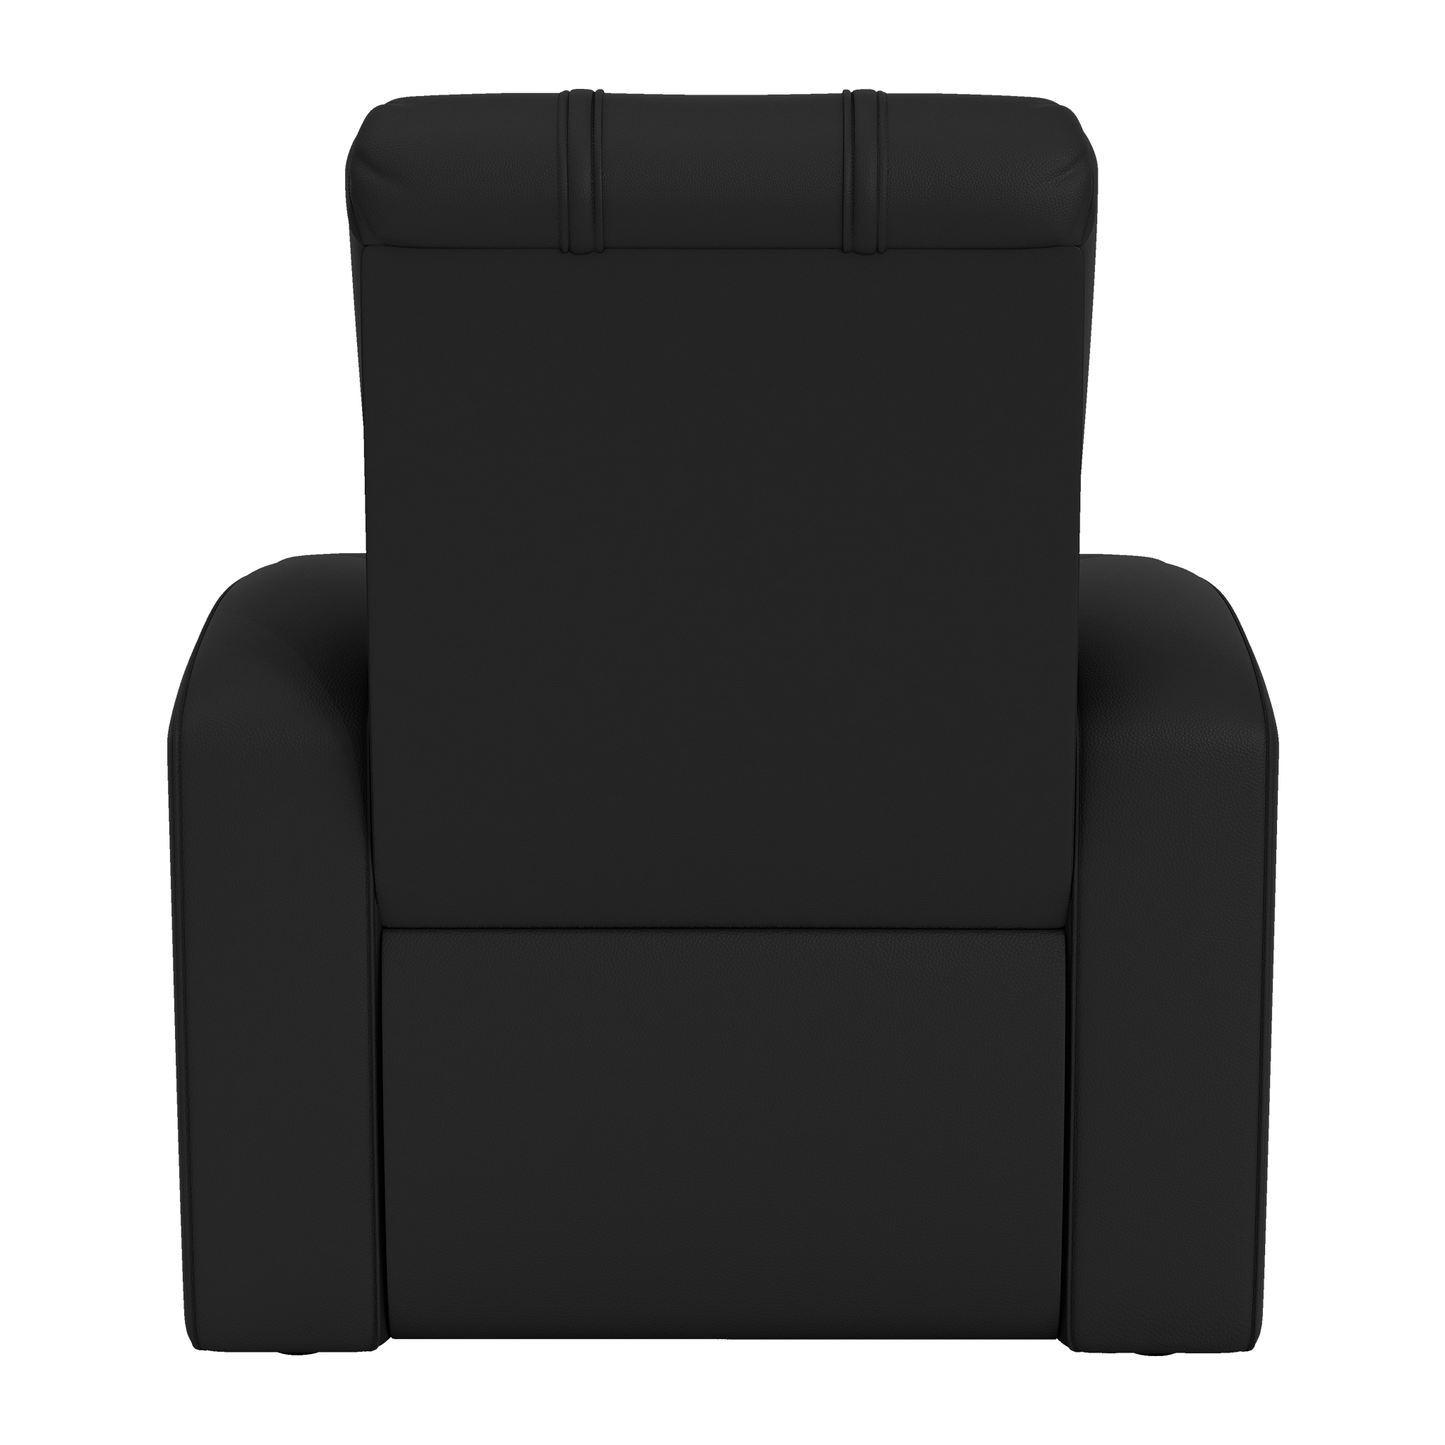 Relax Home Theater Recliner with Tampa Bay Rays Cooperstown Primary